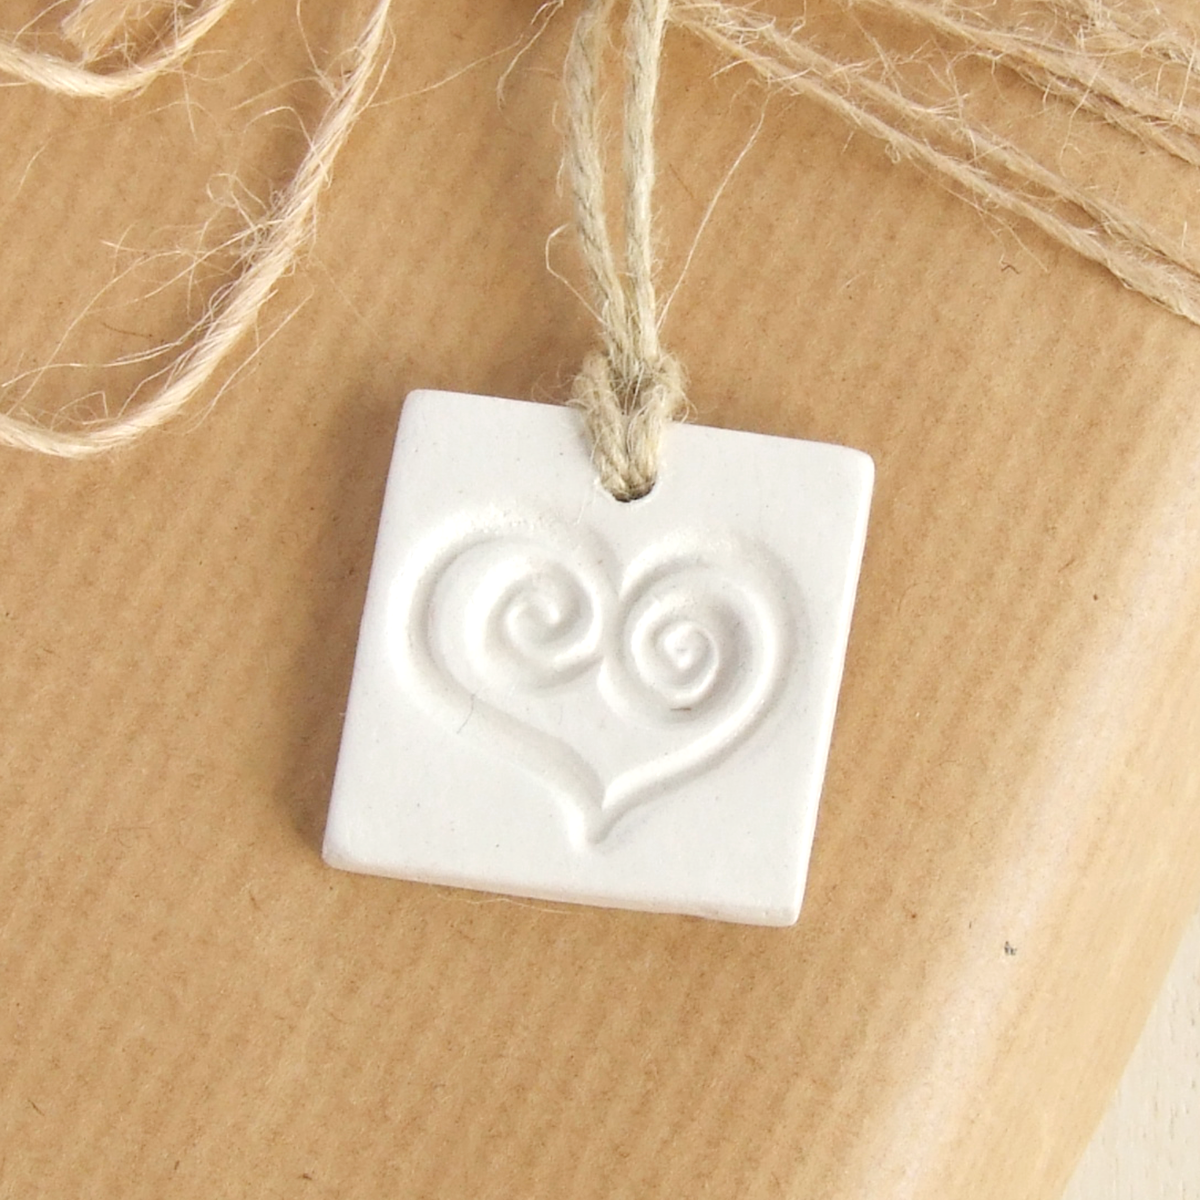 Handmade square white clay gift tags ornament with a heart imprint